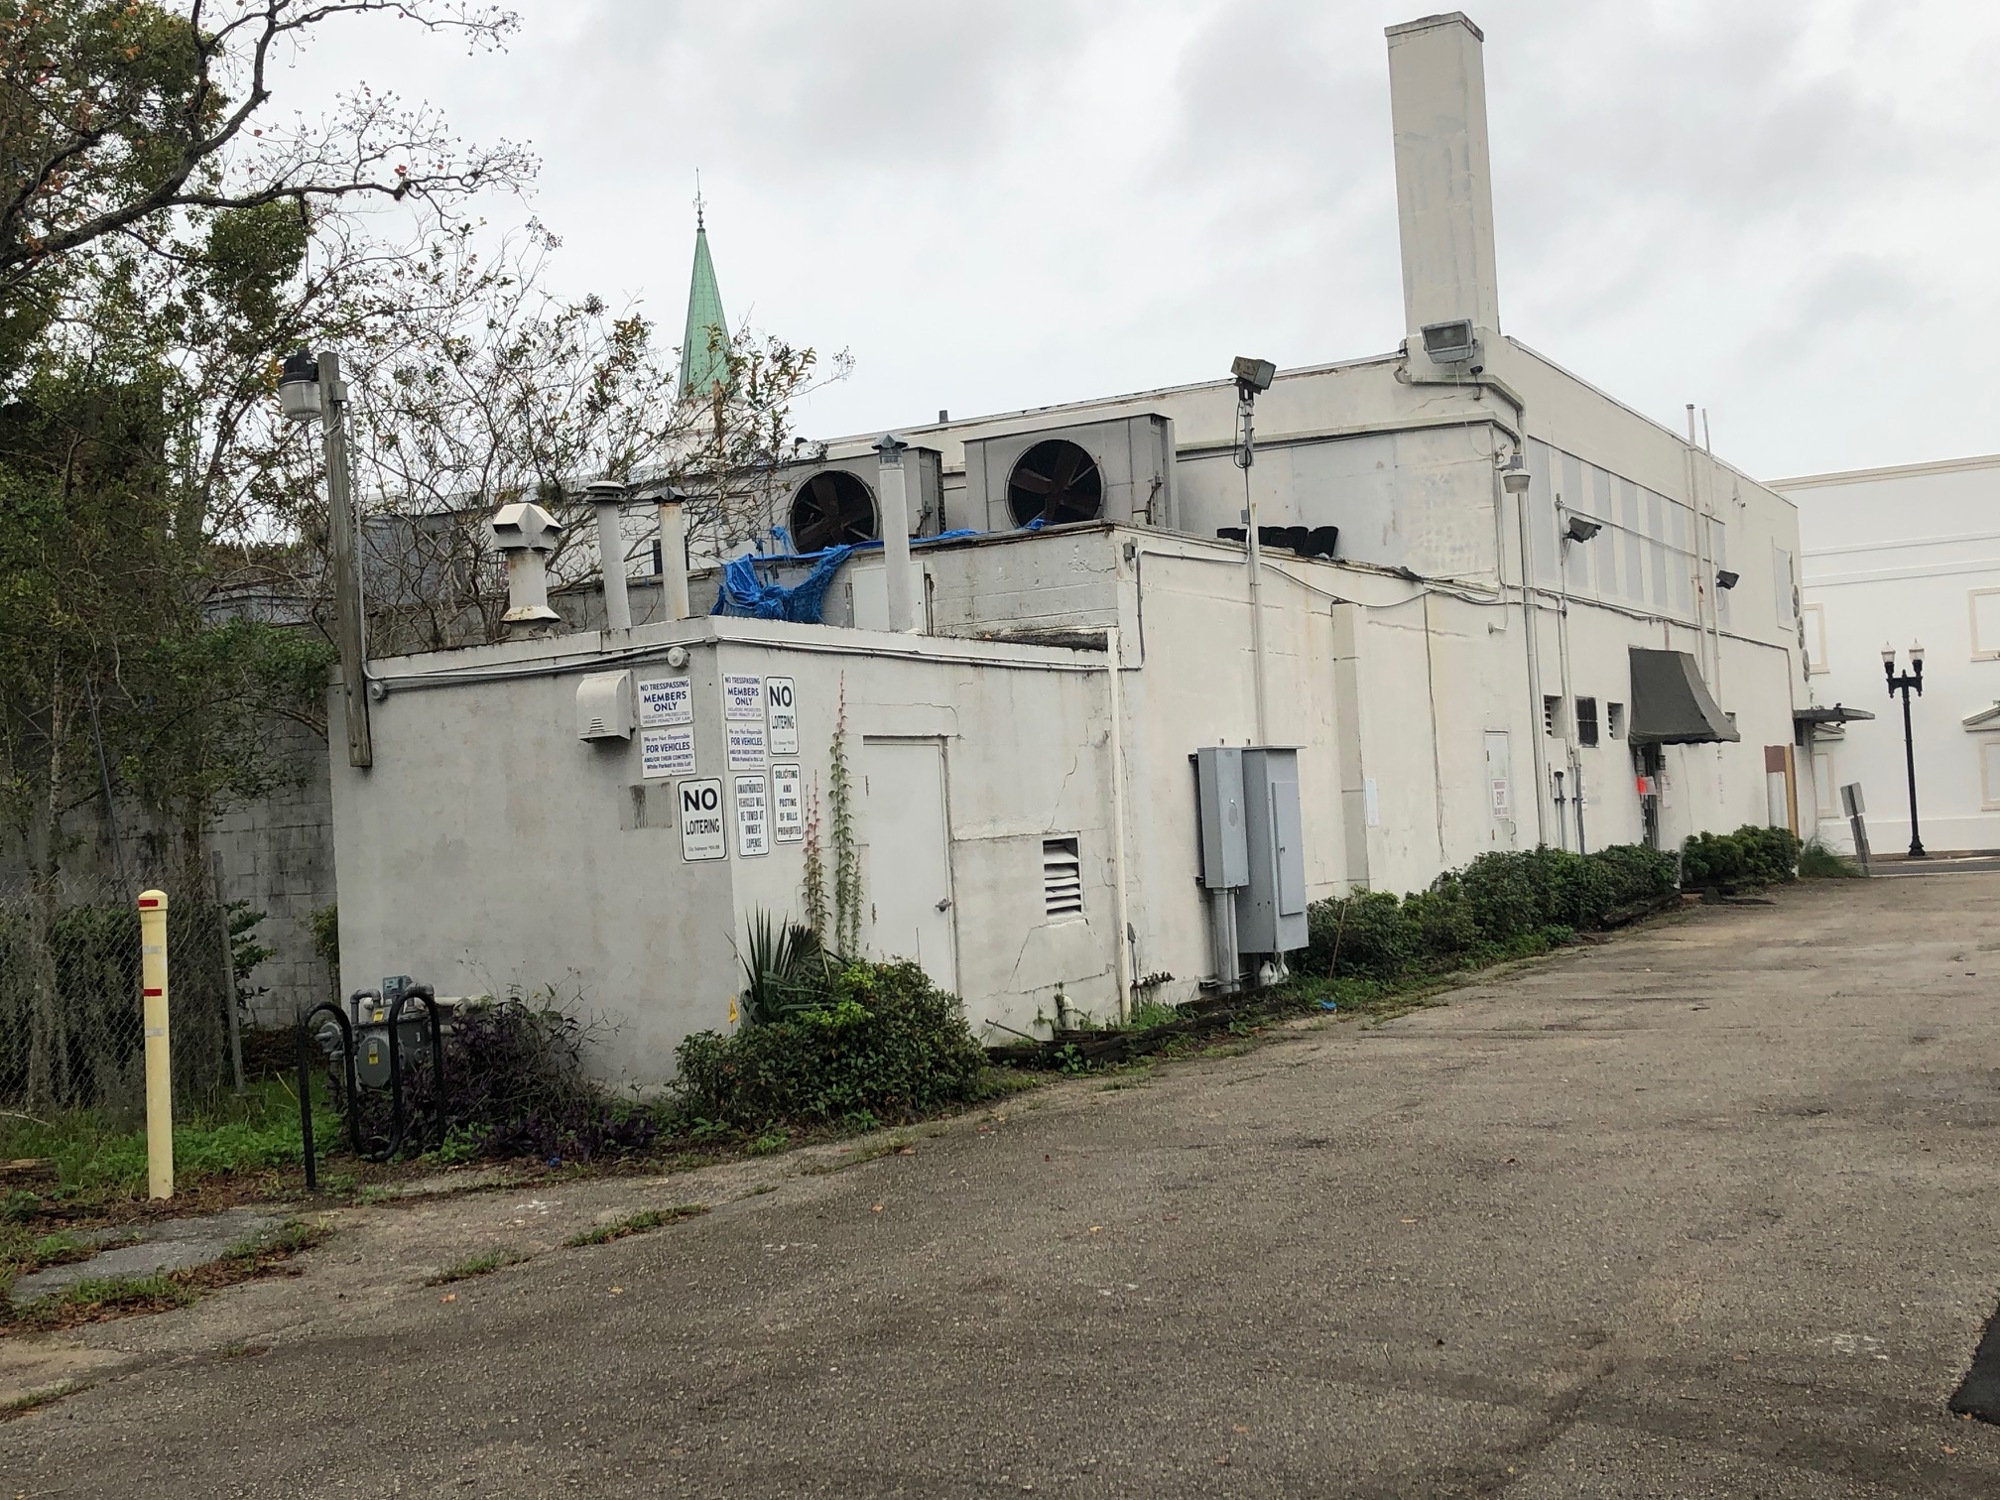 Developer Bill Ware plans demolish the rear of the former San Marco bathhouse building and gut the interior of the two-story front of the structure to transform it into offices.